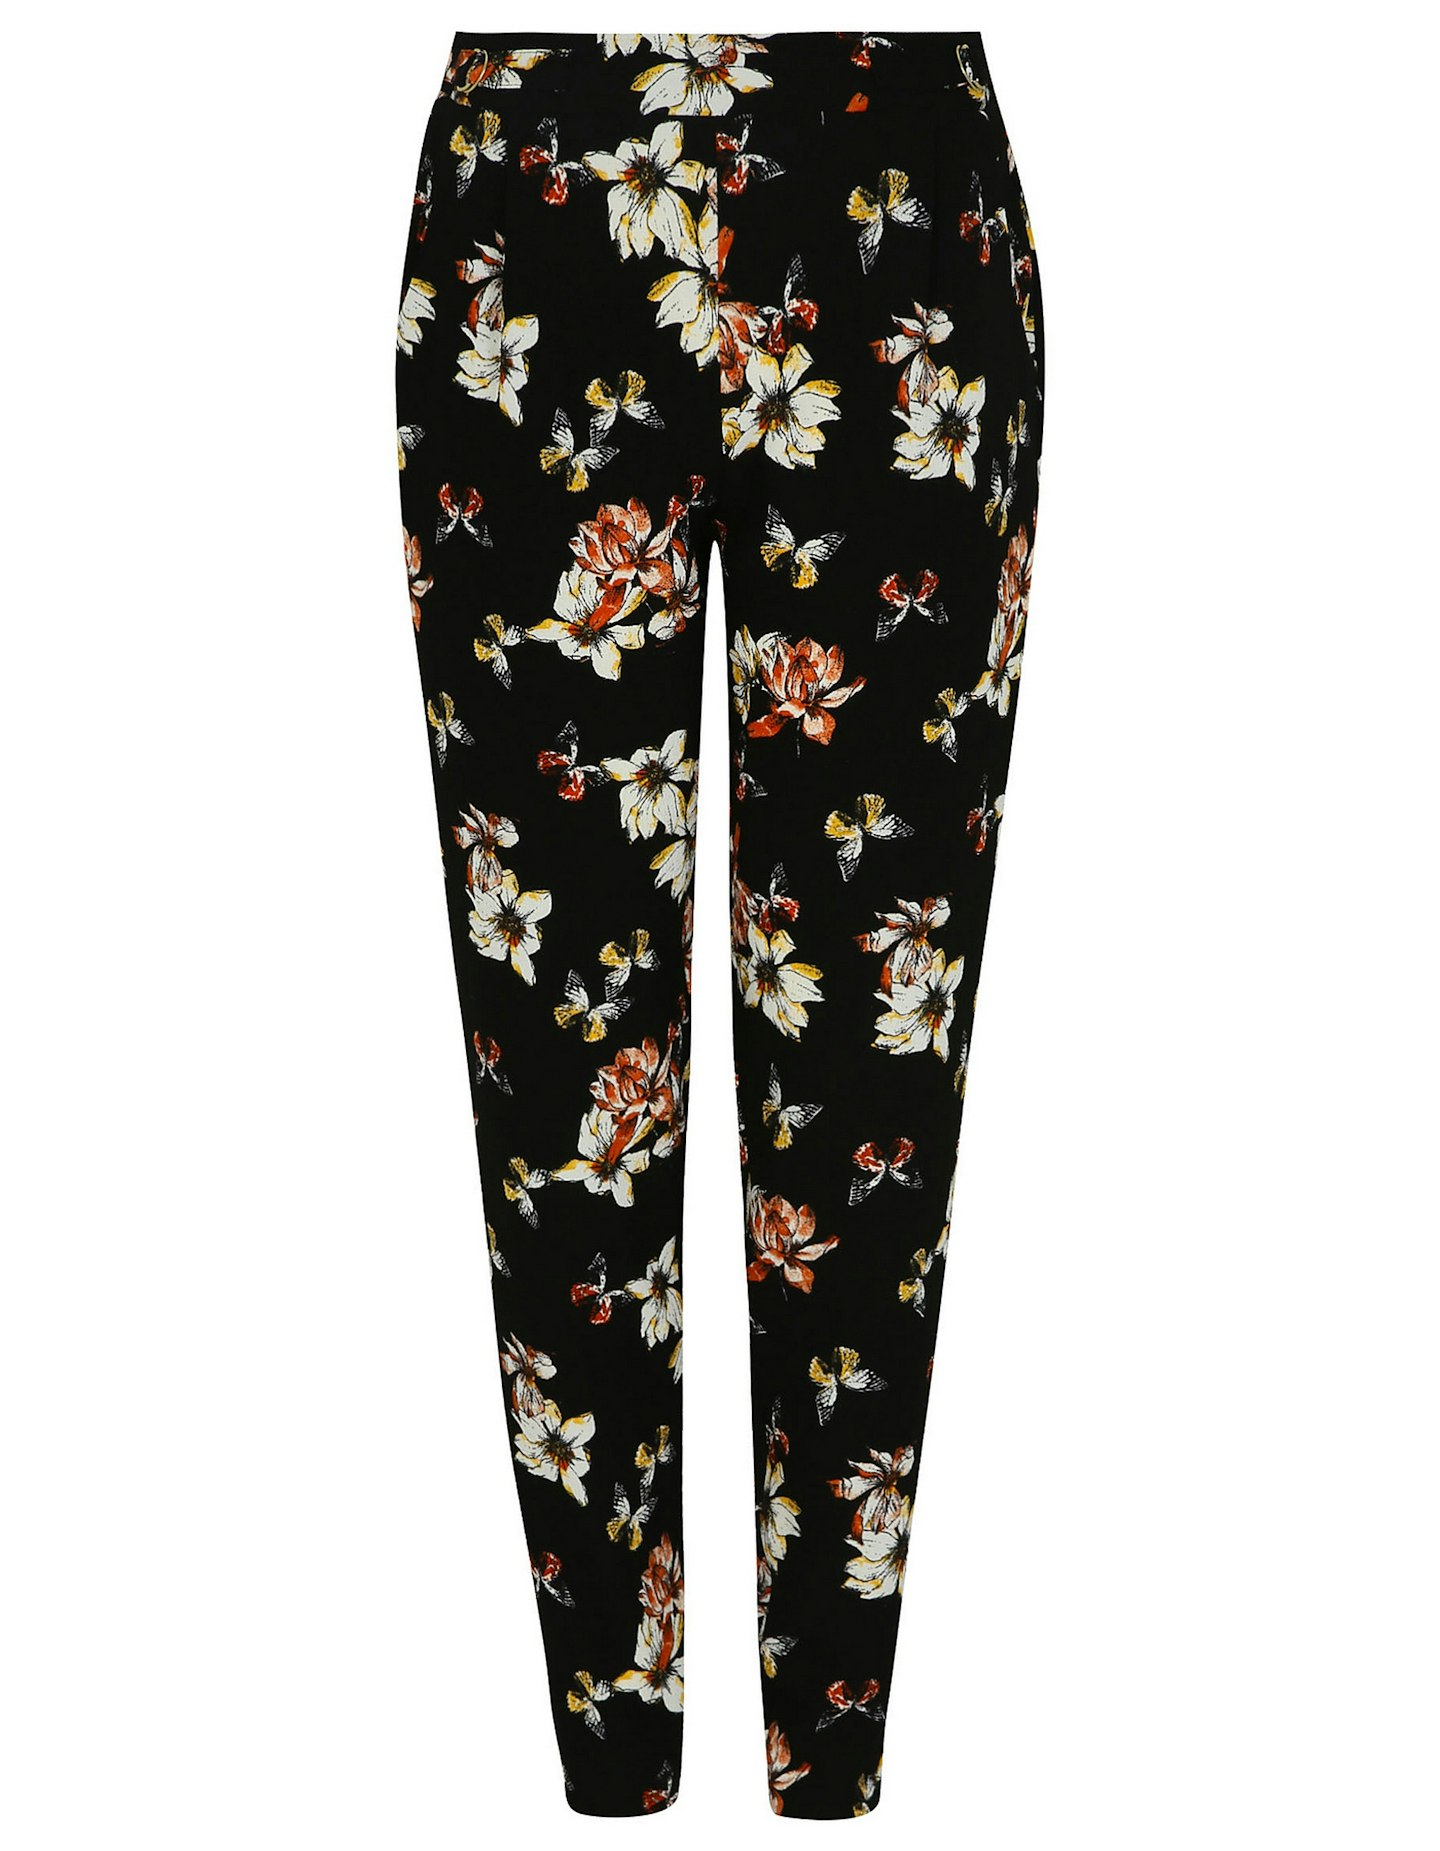 Floral trousers £16